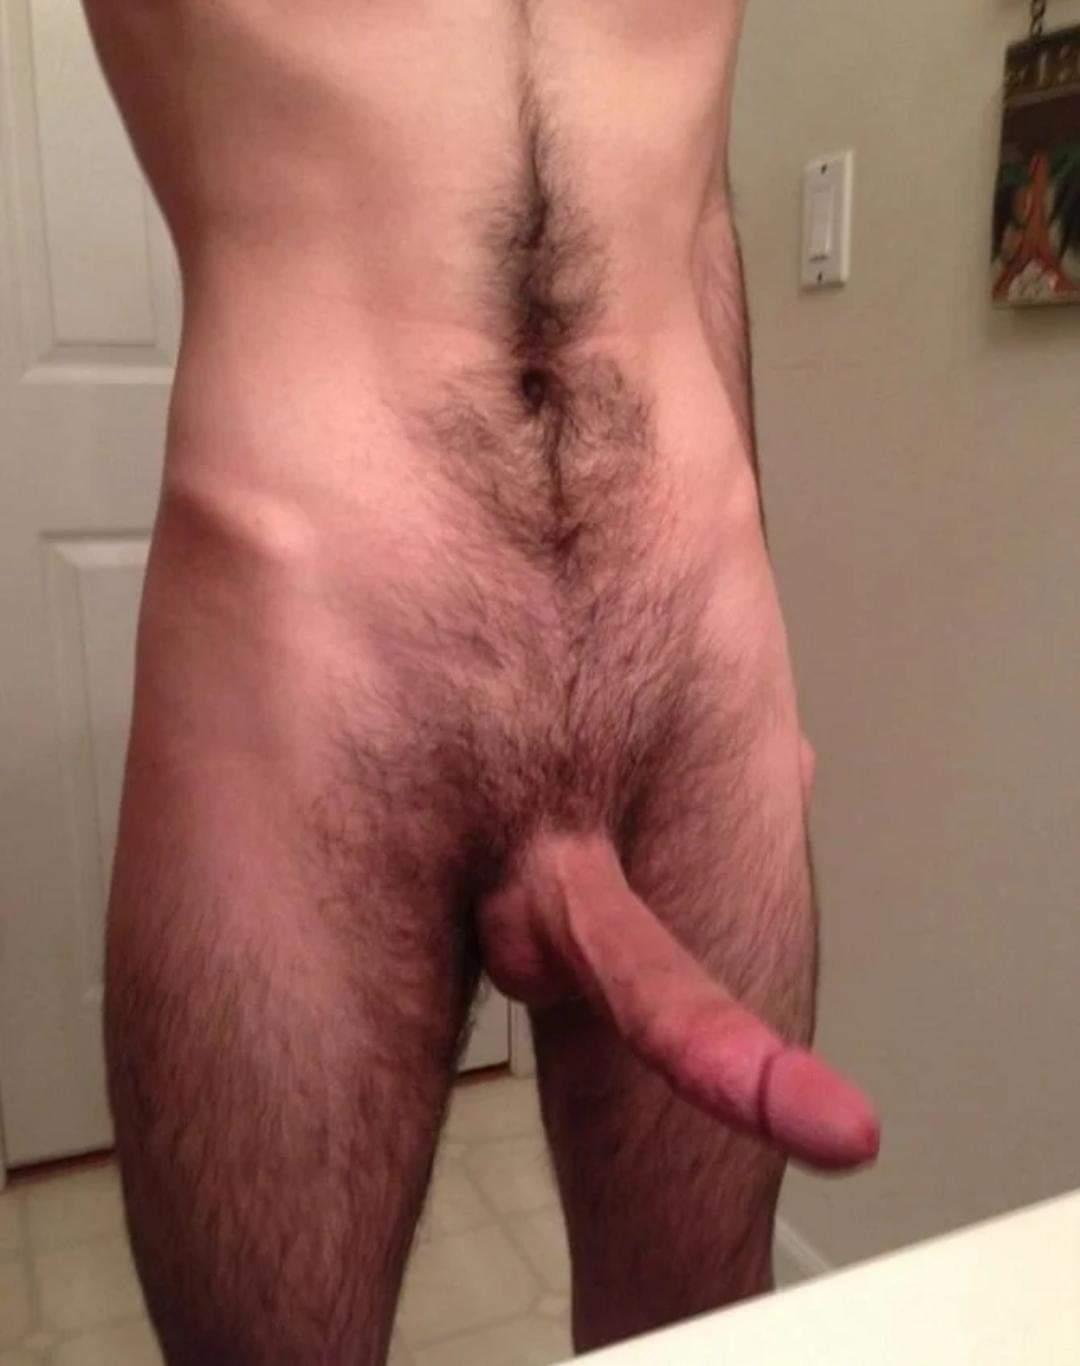 Naked standing up dick hanging